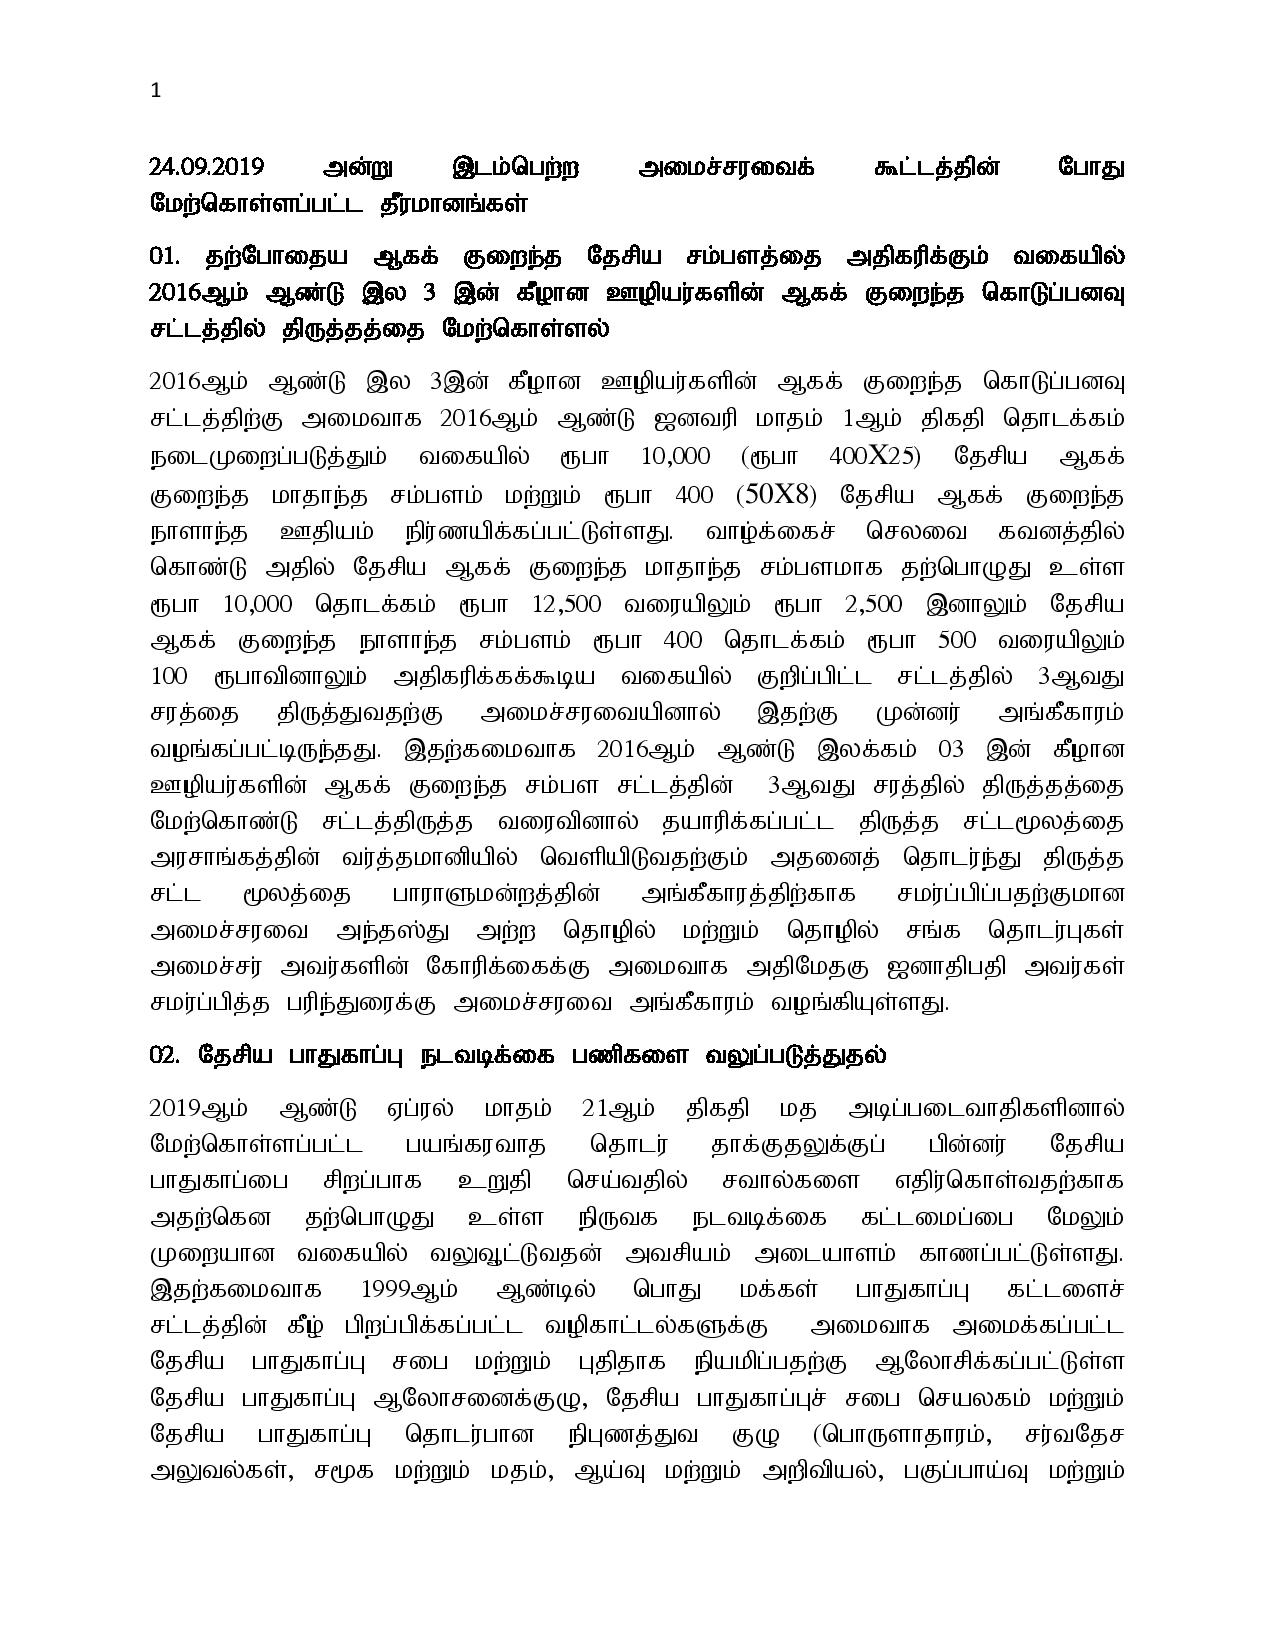 24.09.2019 cabinet page 001